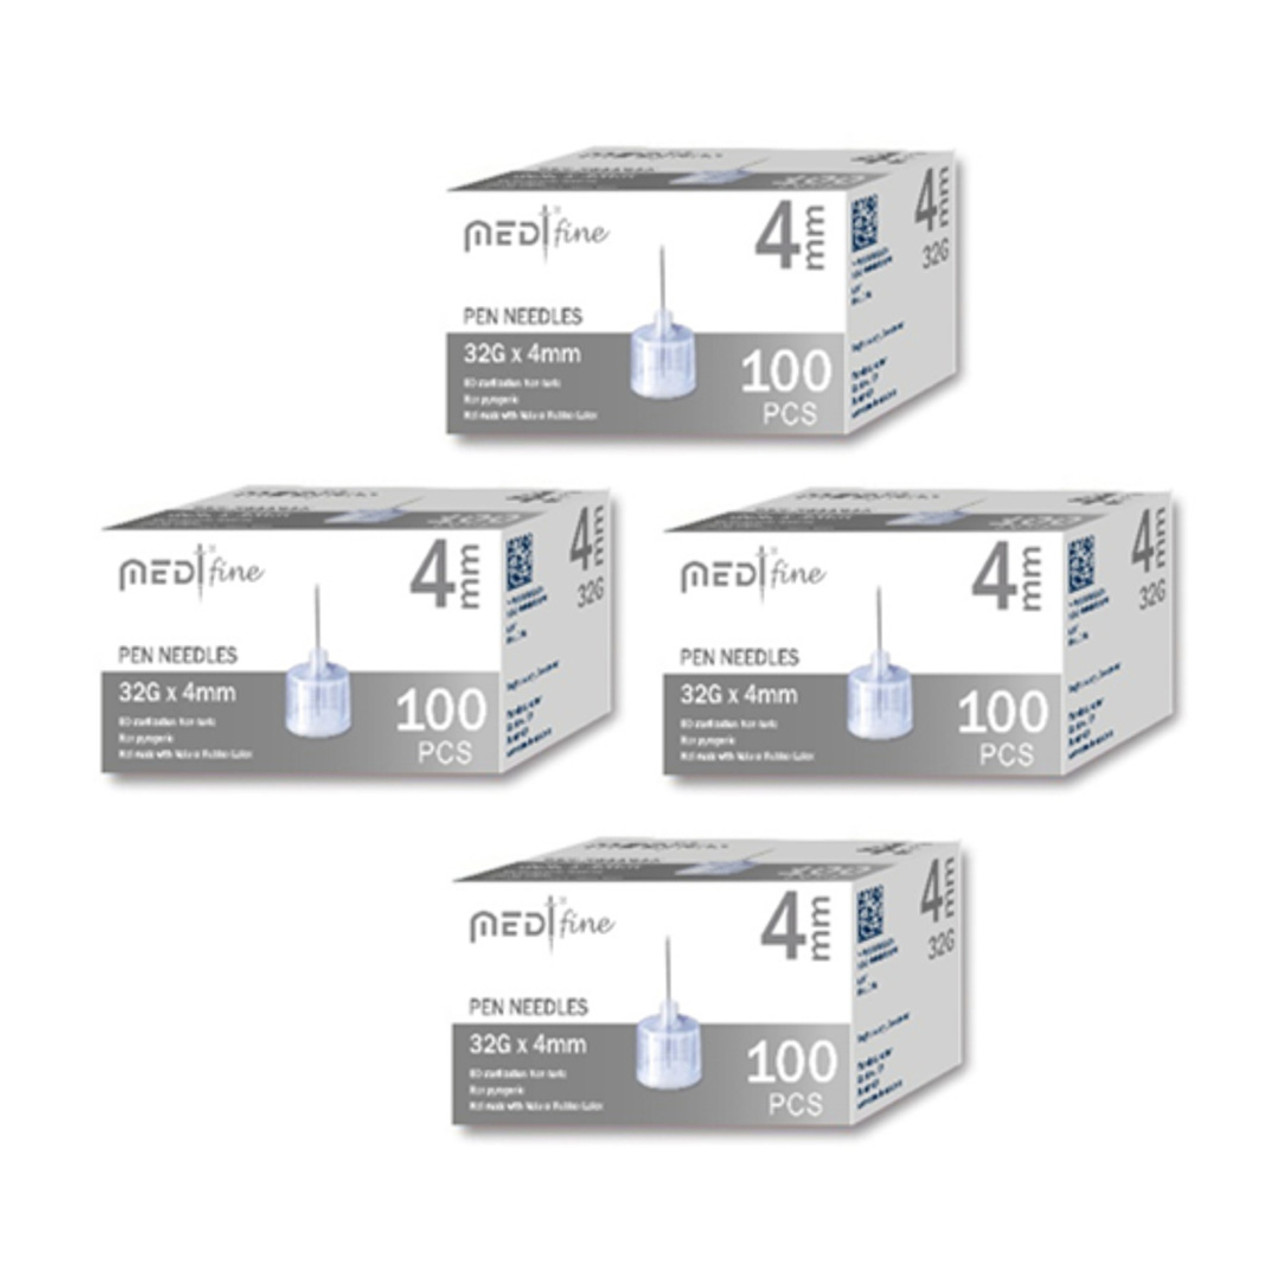  Medt - Fine Insulin Pen Needles (32G 5mm) - Diabetic Needles  for Insulin Injections, Ultra Fine Compatible with Most Diabetes Pens - 100  Ct, Pack of 1 : Health & Household